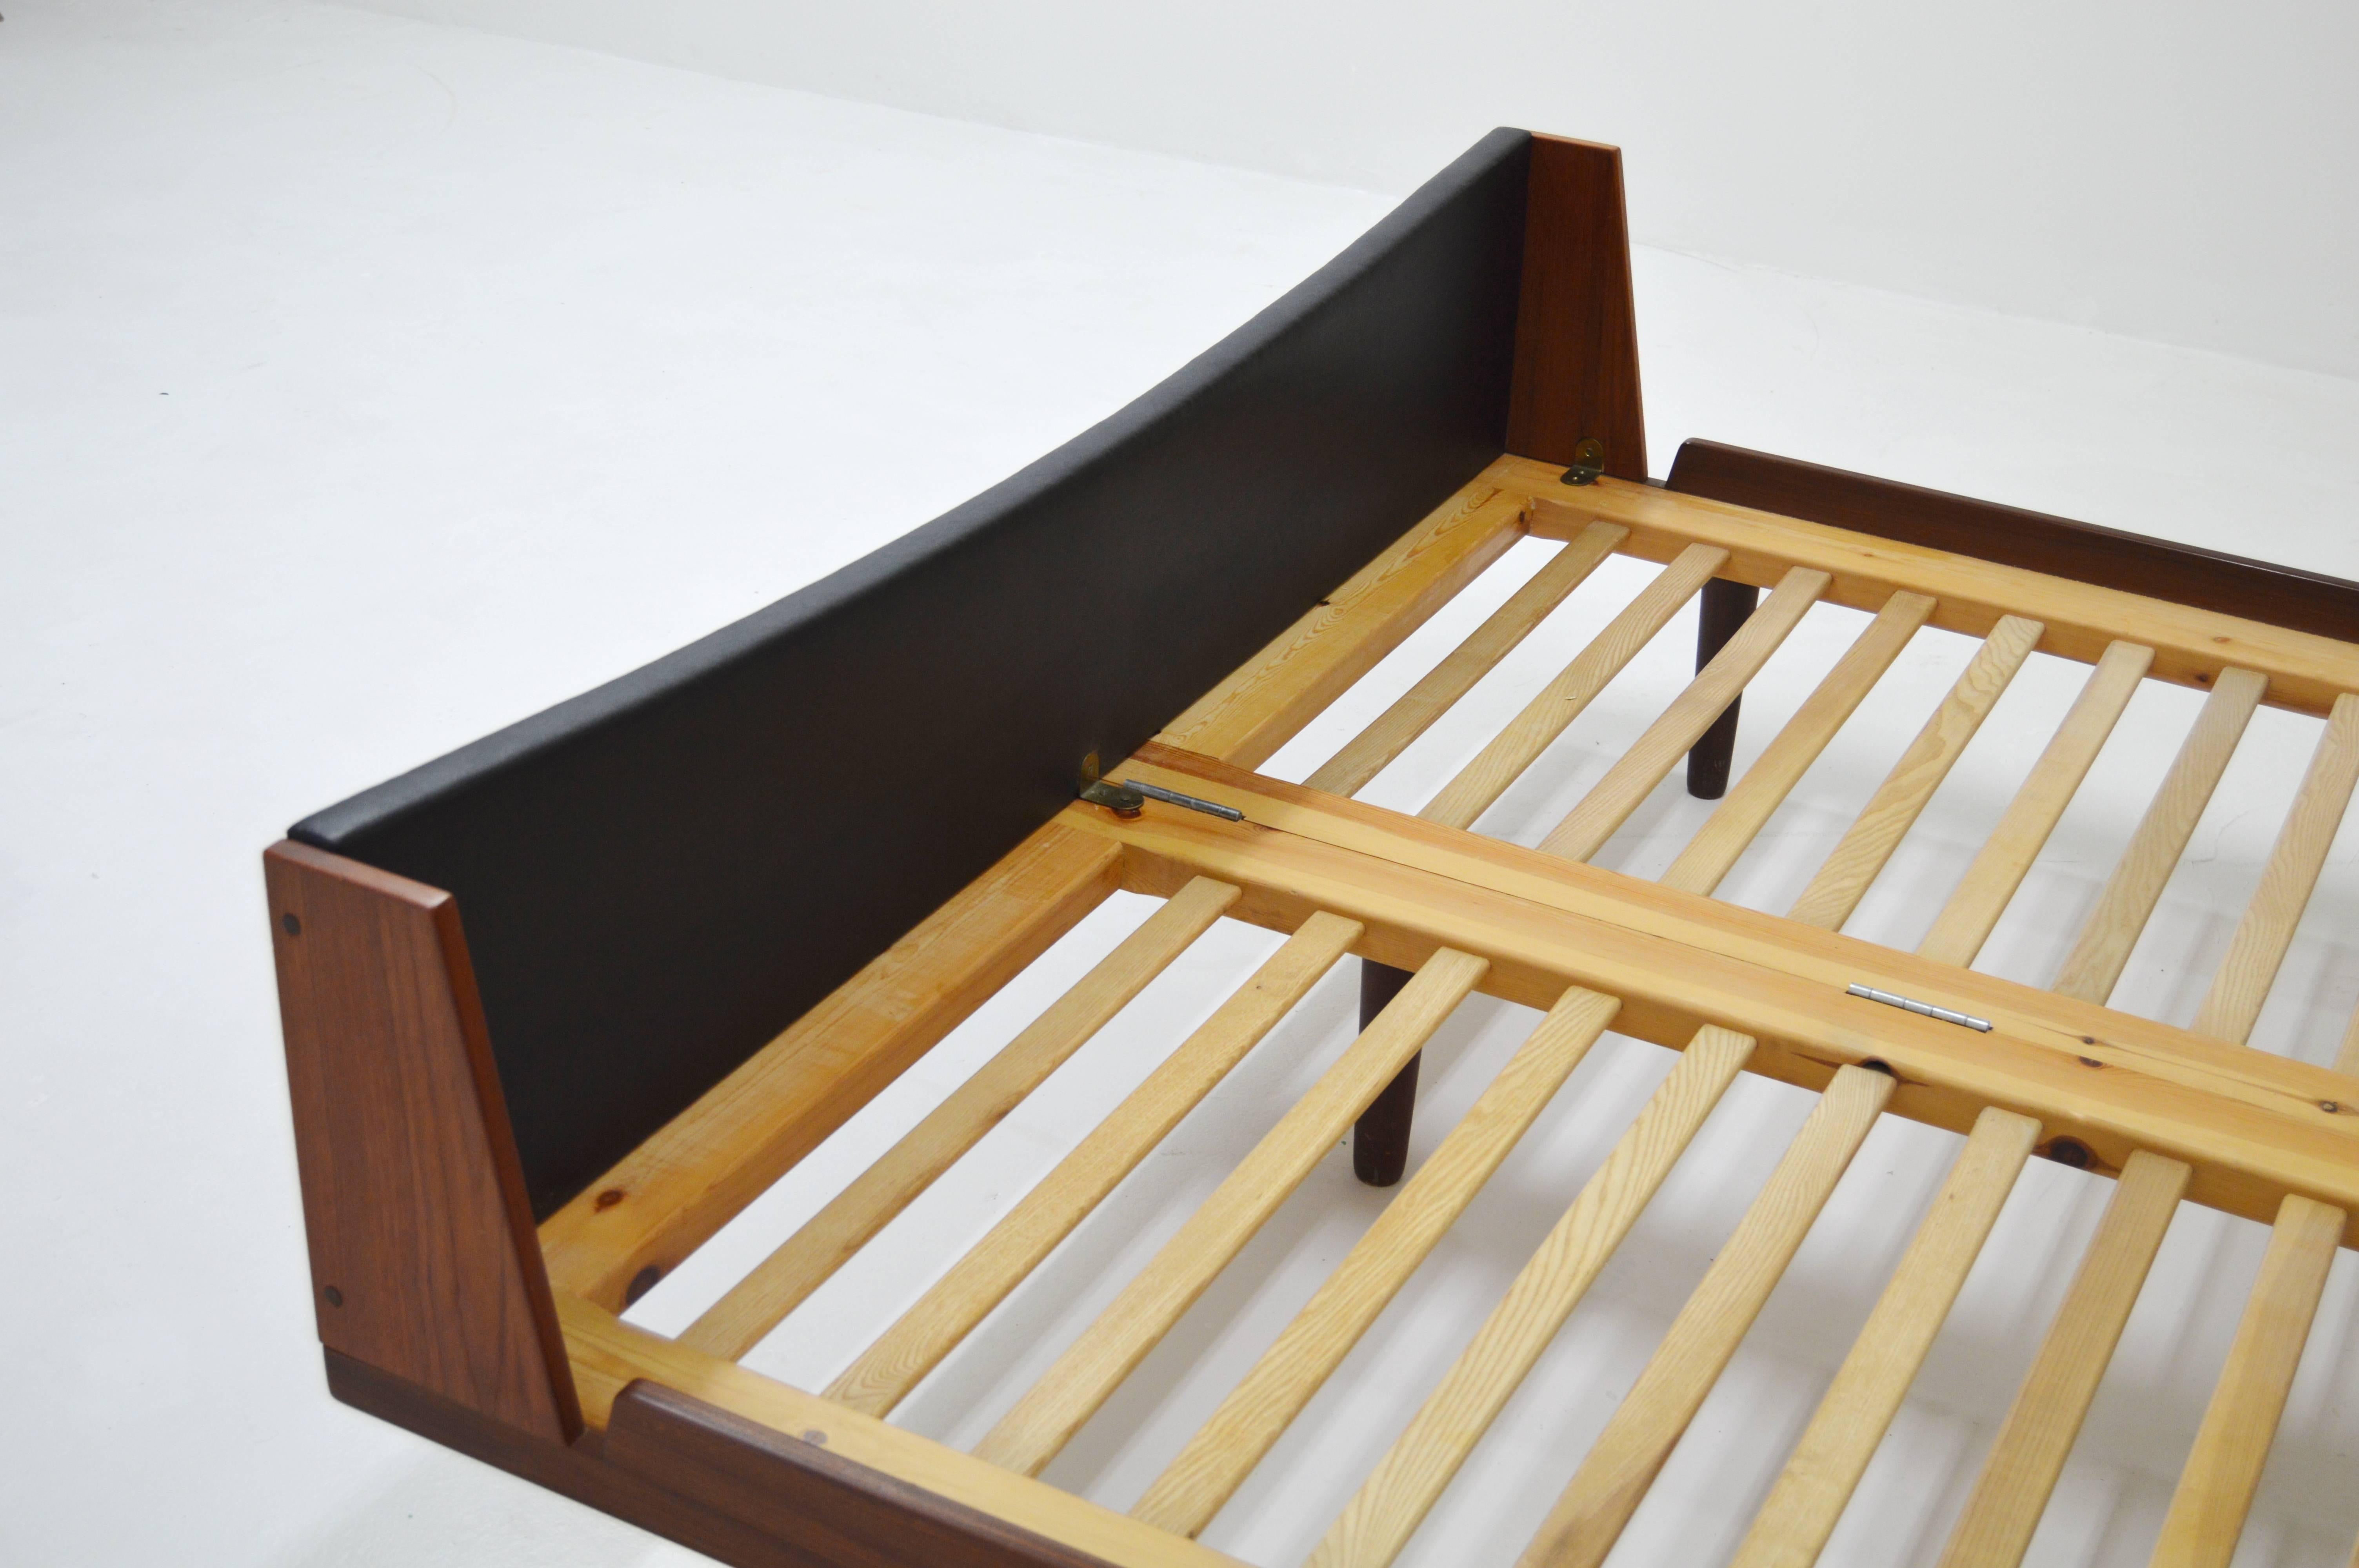 Midcentury Hans J Wegner Double Master Bed with Teak and Rattan In Good Condition For Sale In Alvesta, SE